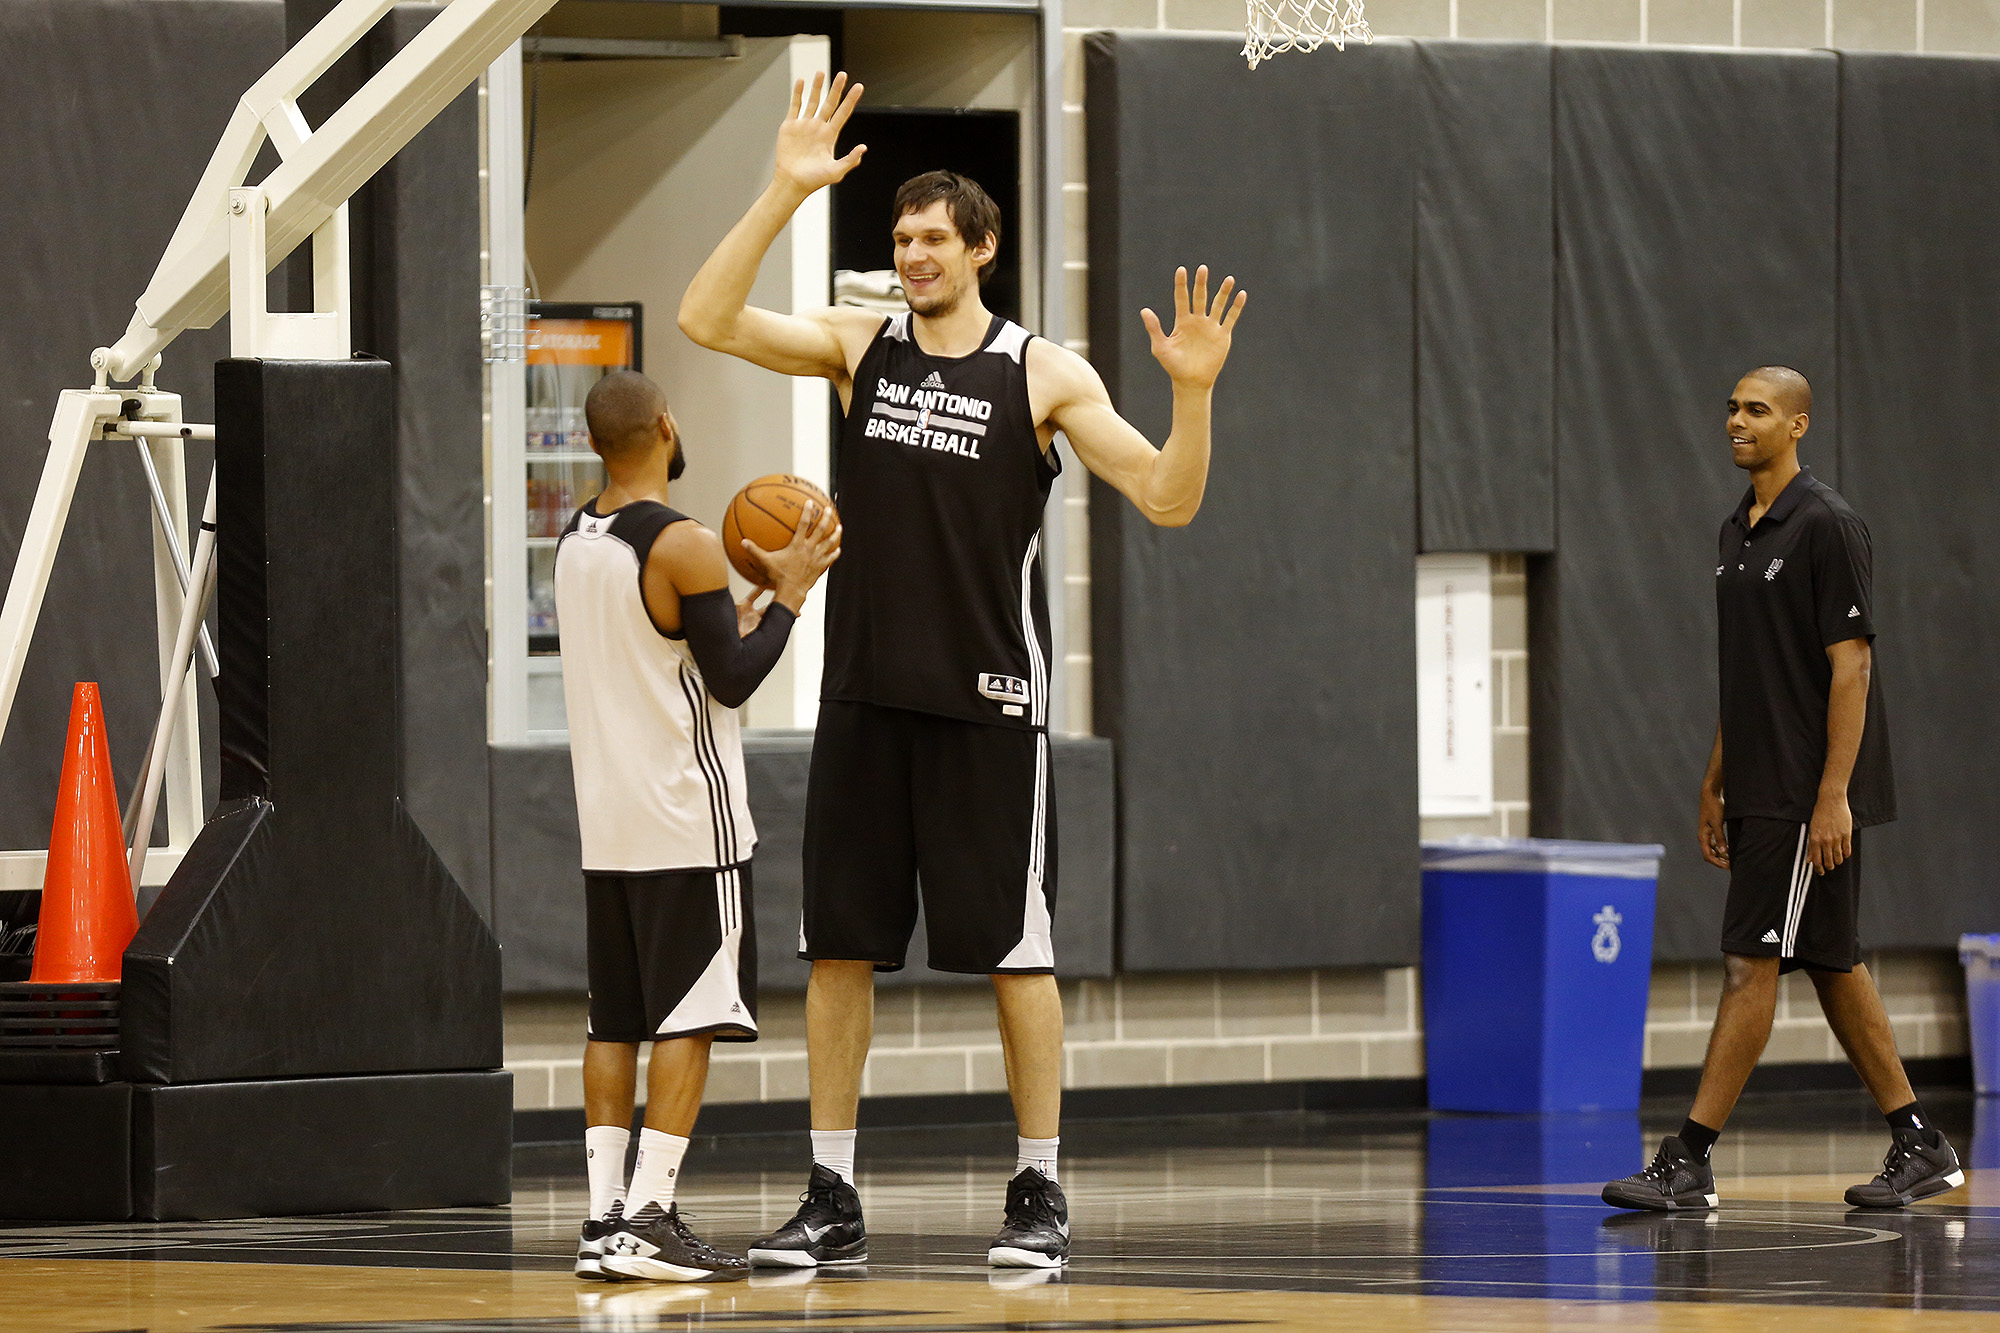 Boban Marjanovic Is Entering Fans' Hearts, if Not the Spurs